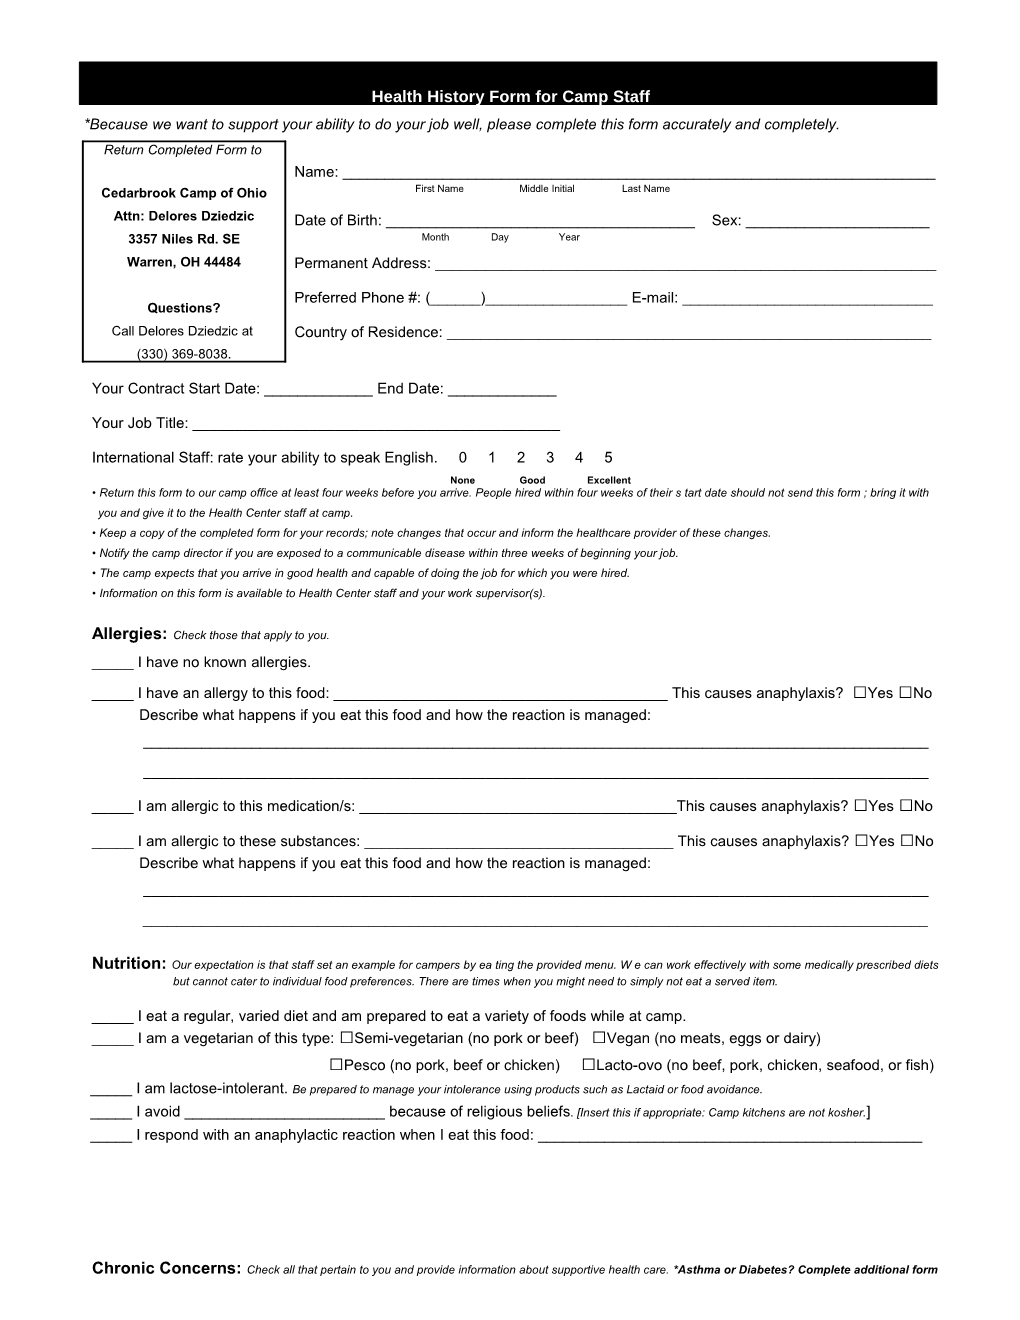 Health History Form for Camp Staff